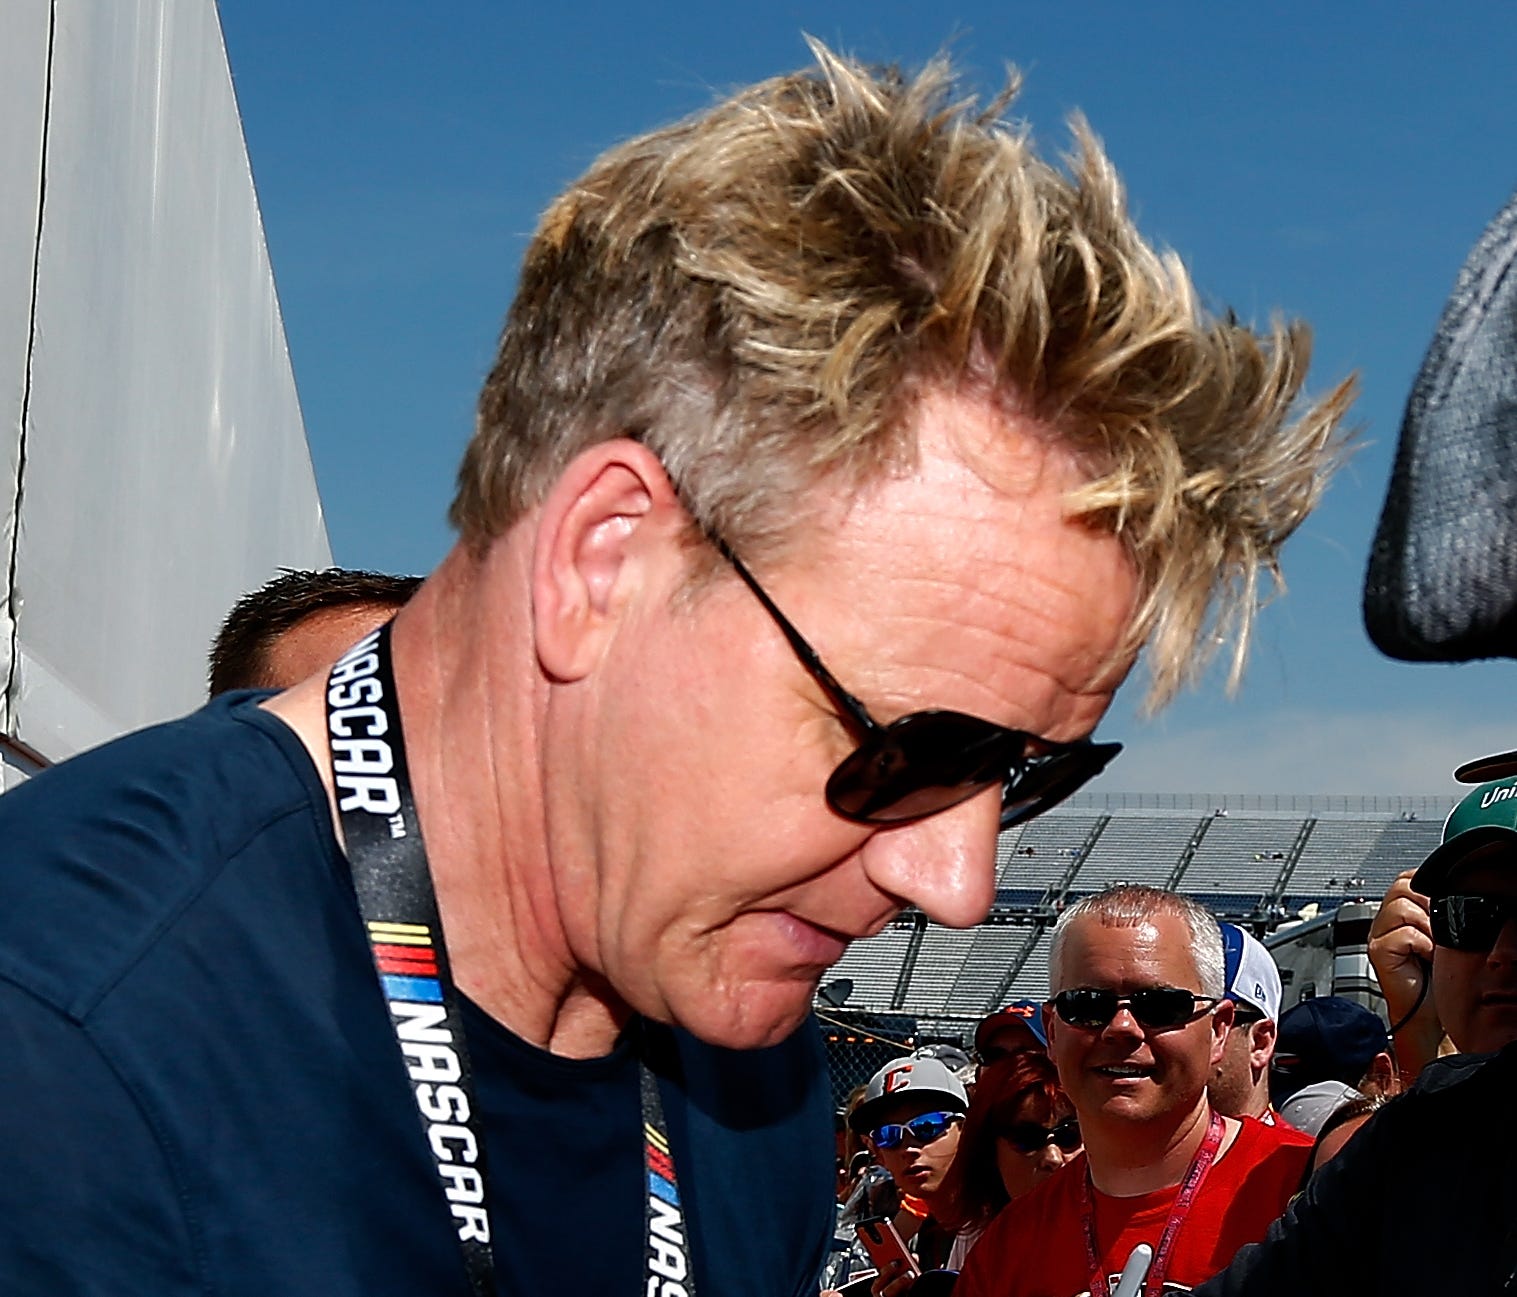 British celebrity chef, restaurateur, and TV personality Gordon Ramsay signs autographs before the NASCAR Cup race at Dover International Speedway.